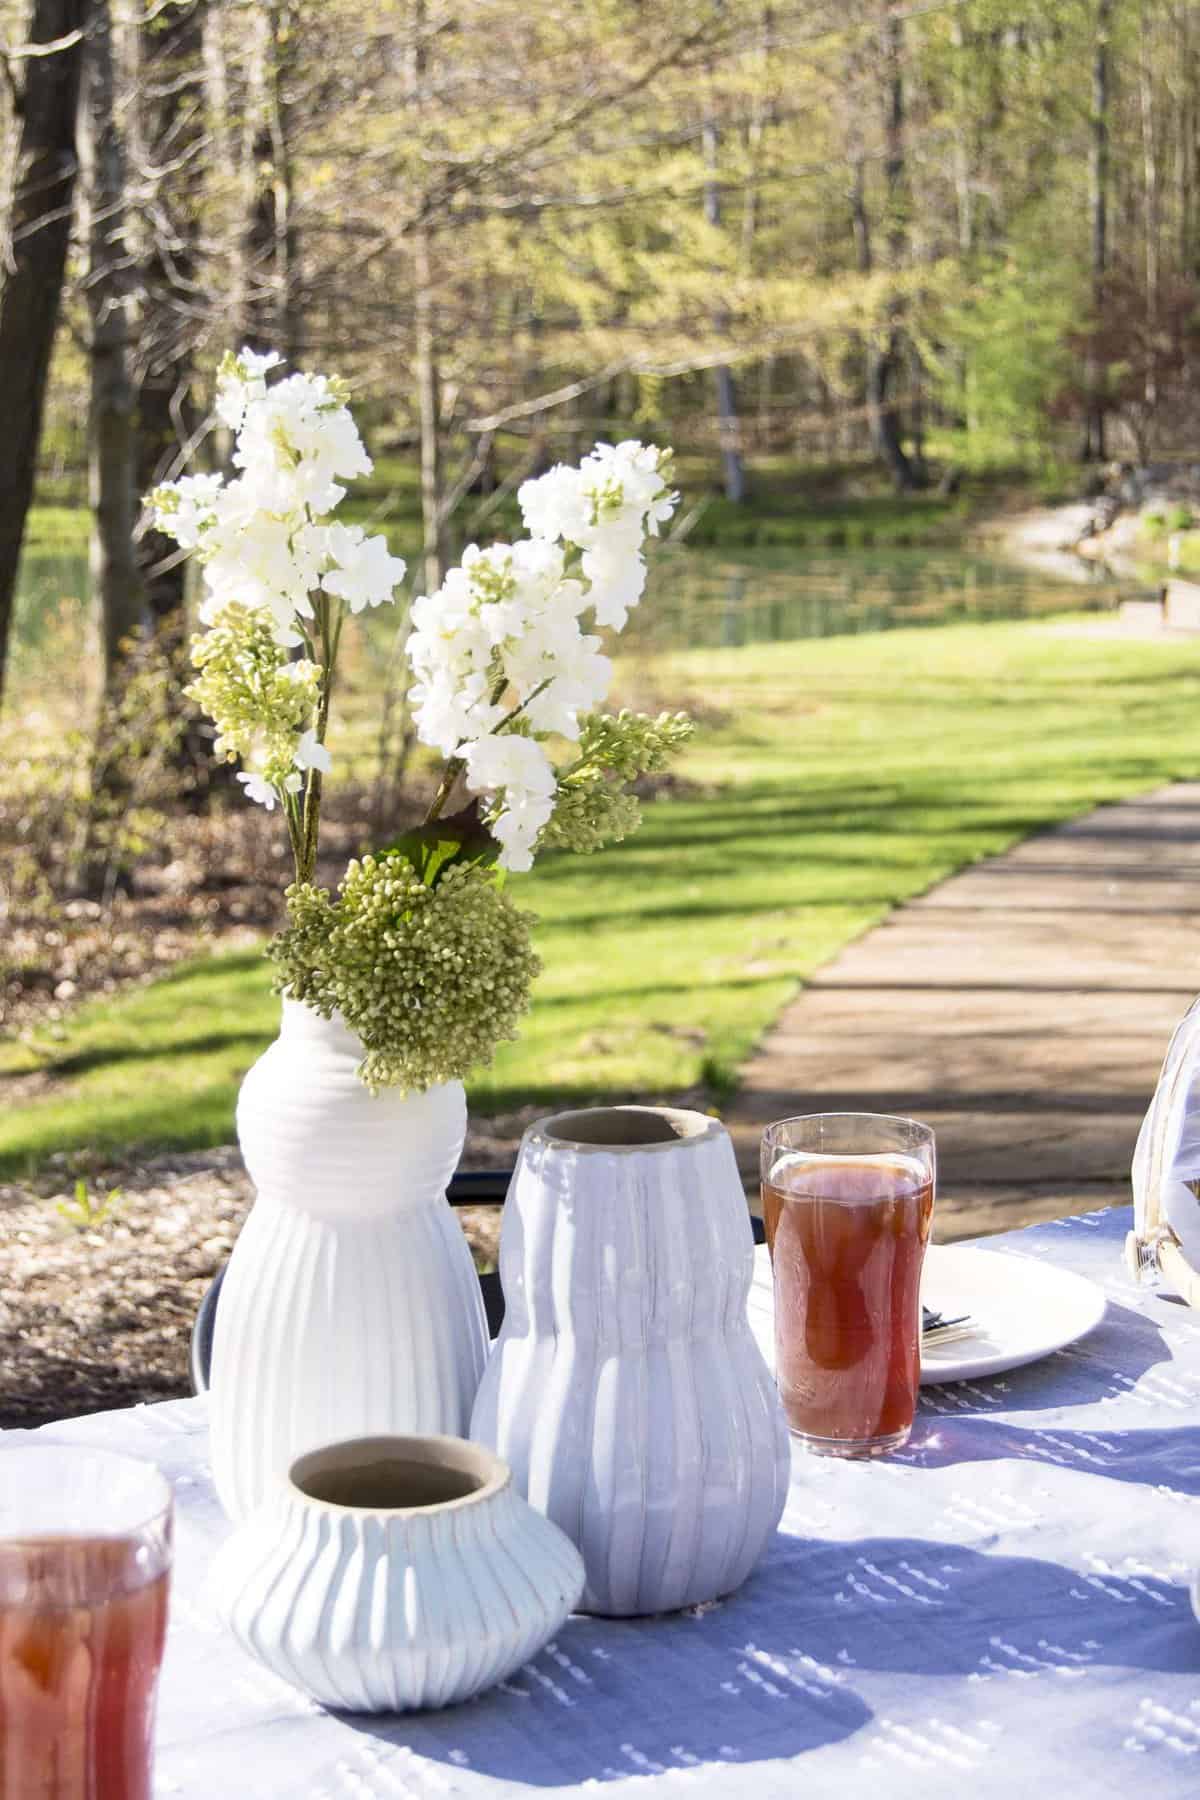 Do you love outdoor entertaining? Here are my top three must haves for a fabulous backyard party that serves your guests with ease. #fromhousetohaven #backyardparty #outdoordining